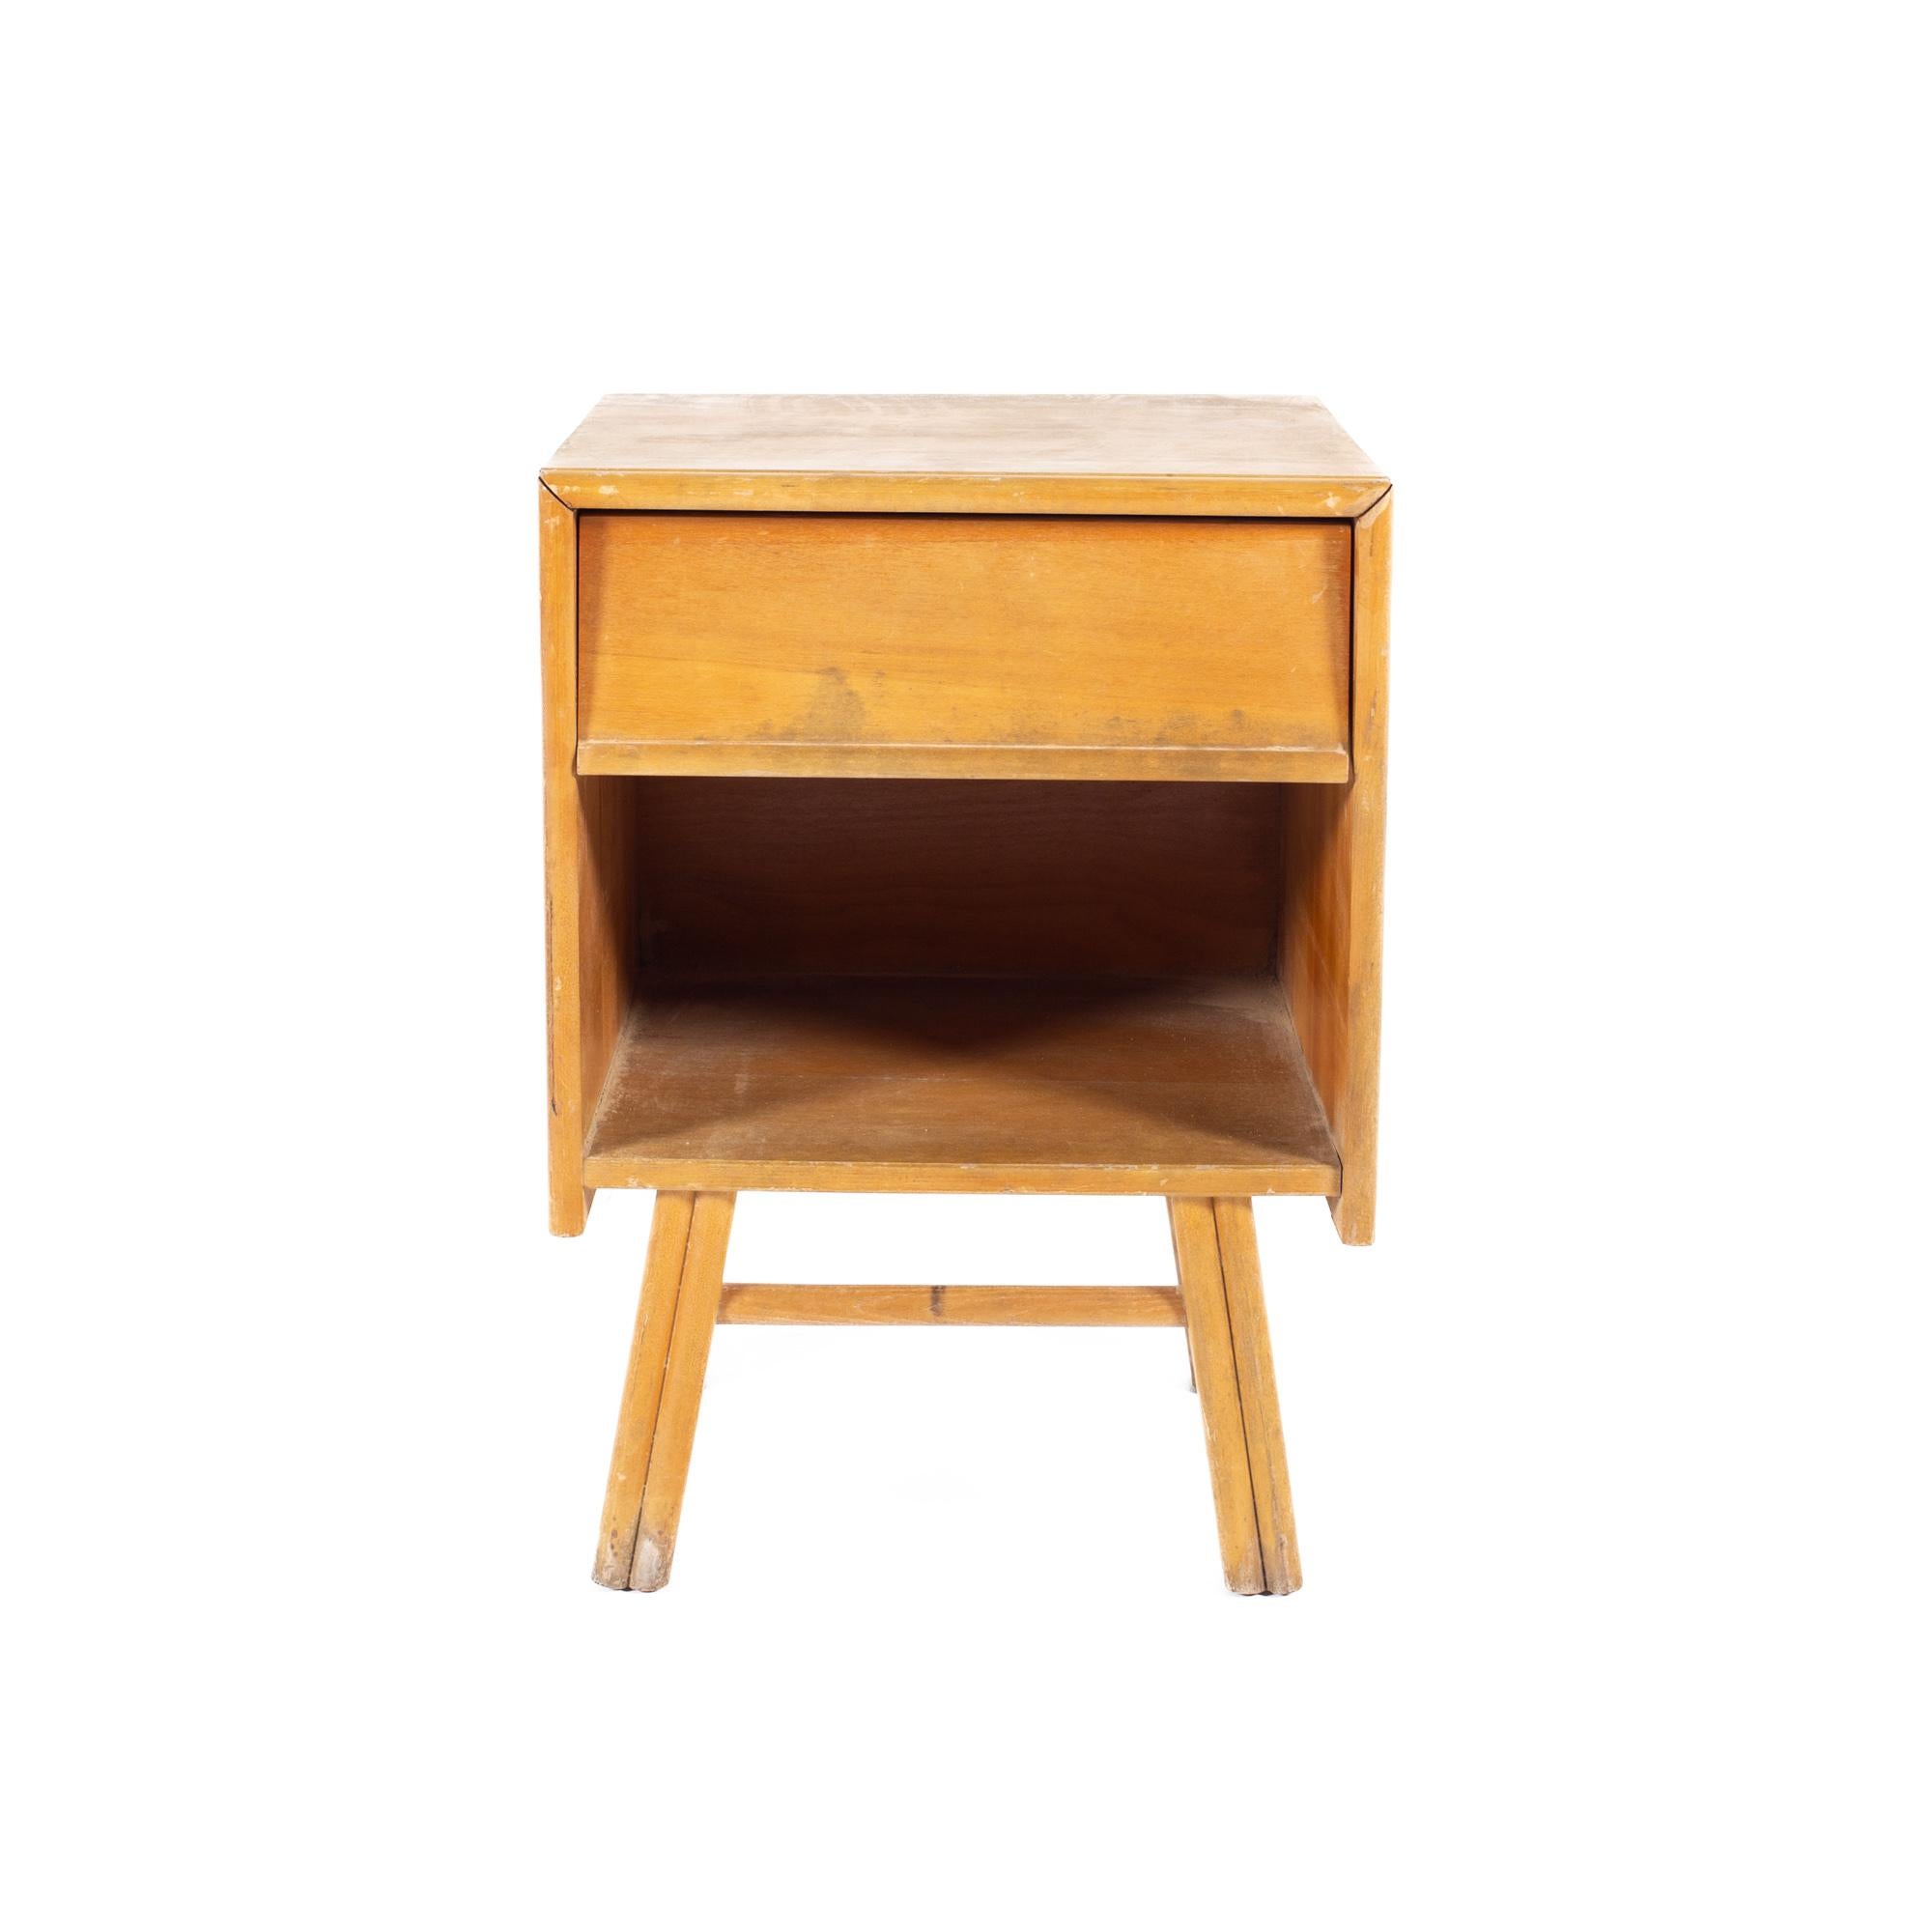 Heywood Wakefield mid century bamboo leg nightstand

This nightstand measures: 18 wide x 16 deep x 25 inches high

All pieces of furniture can be had in what we call restored vintage condition. That means the piece is restored upon purchase so